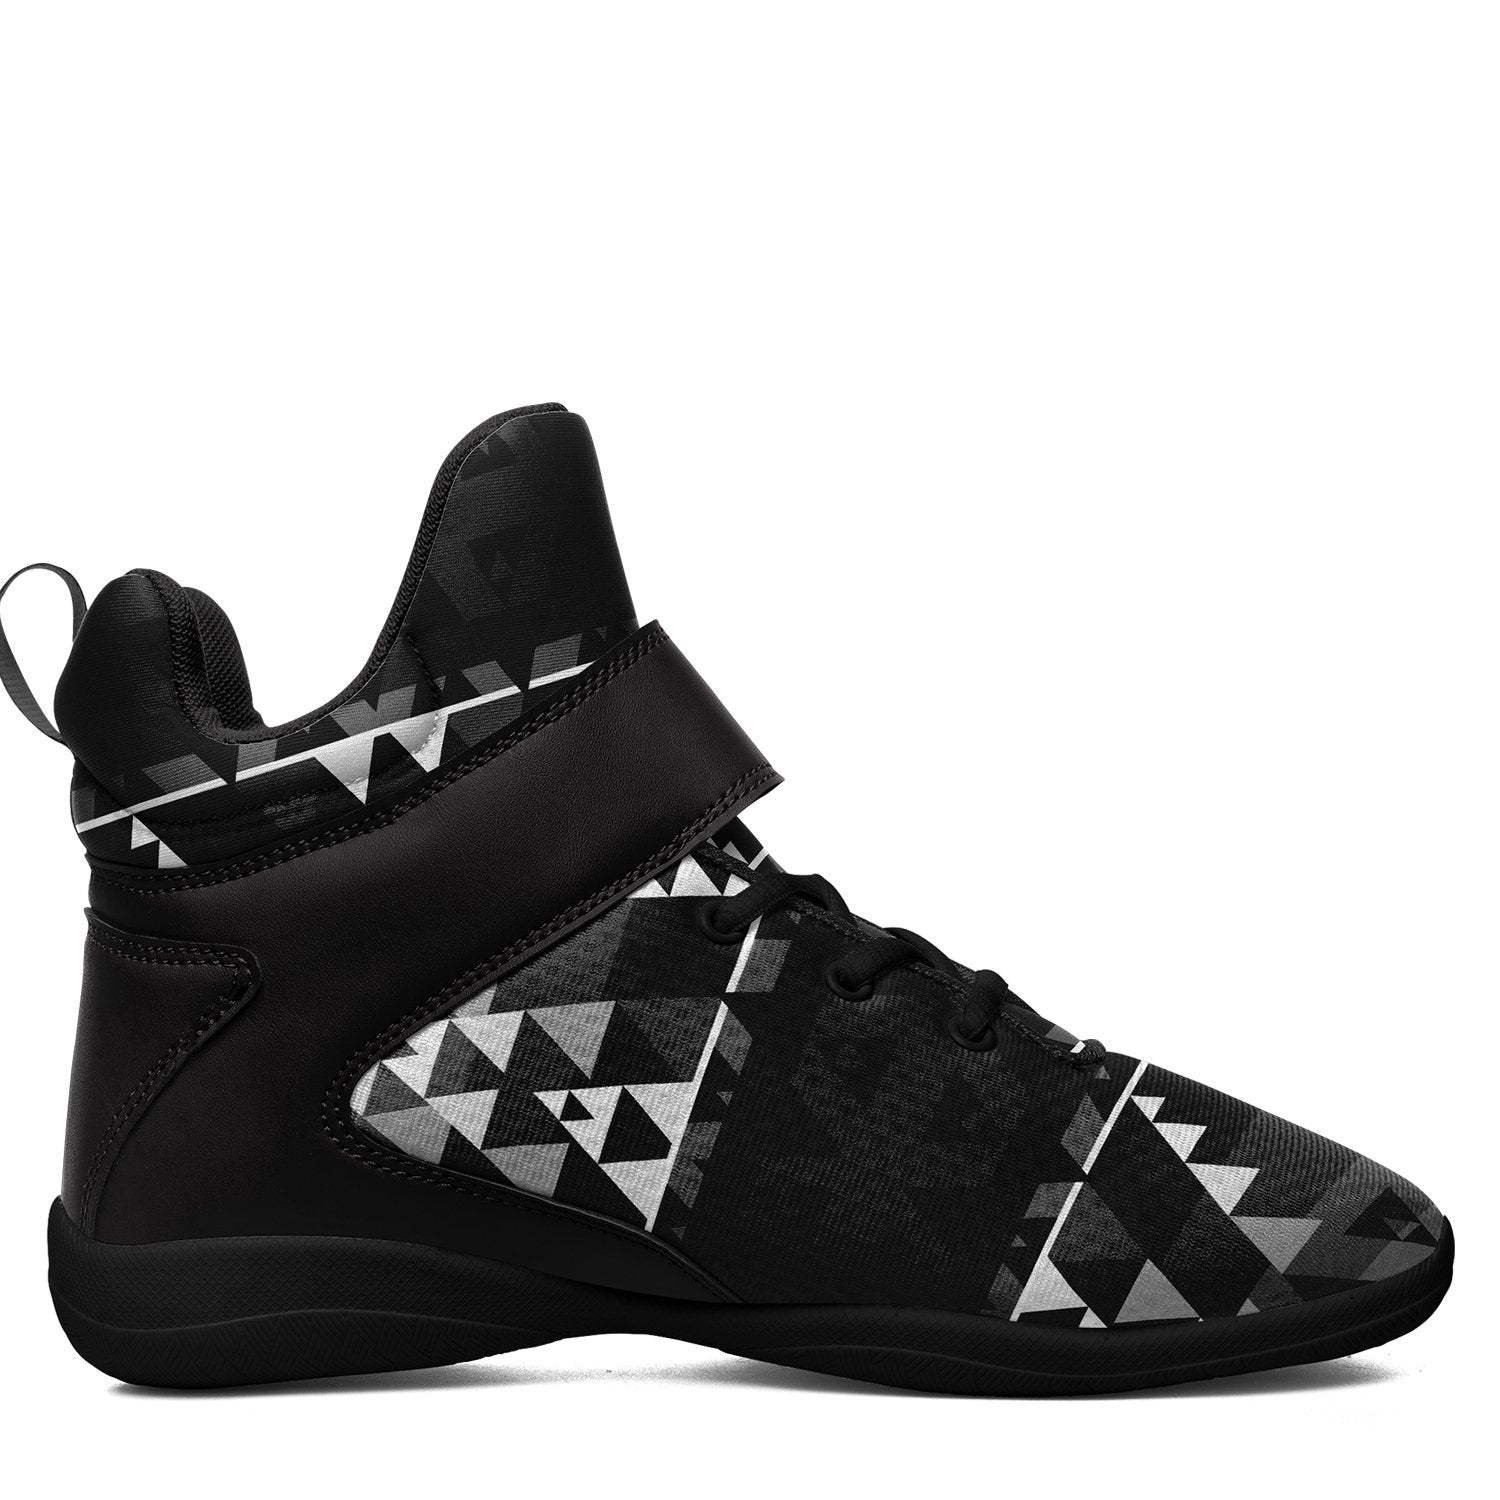 Writing on Stone Black and White Ipottaa Basketball / Sport High Top Shoes - Black Sole 49 Dzine 